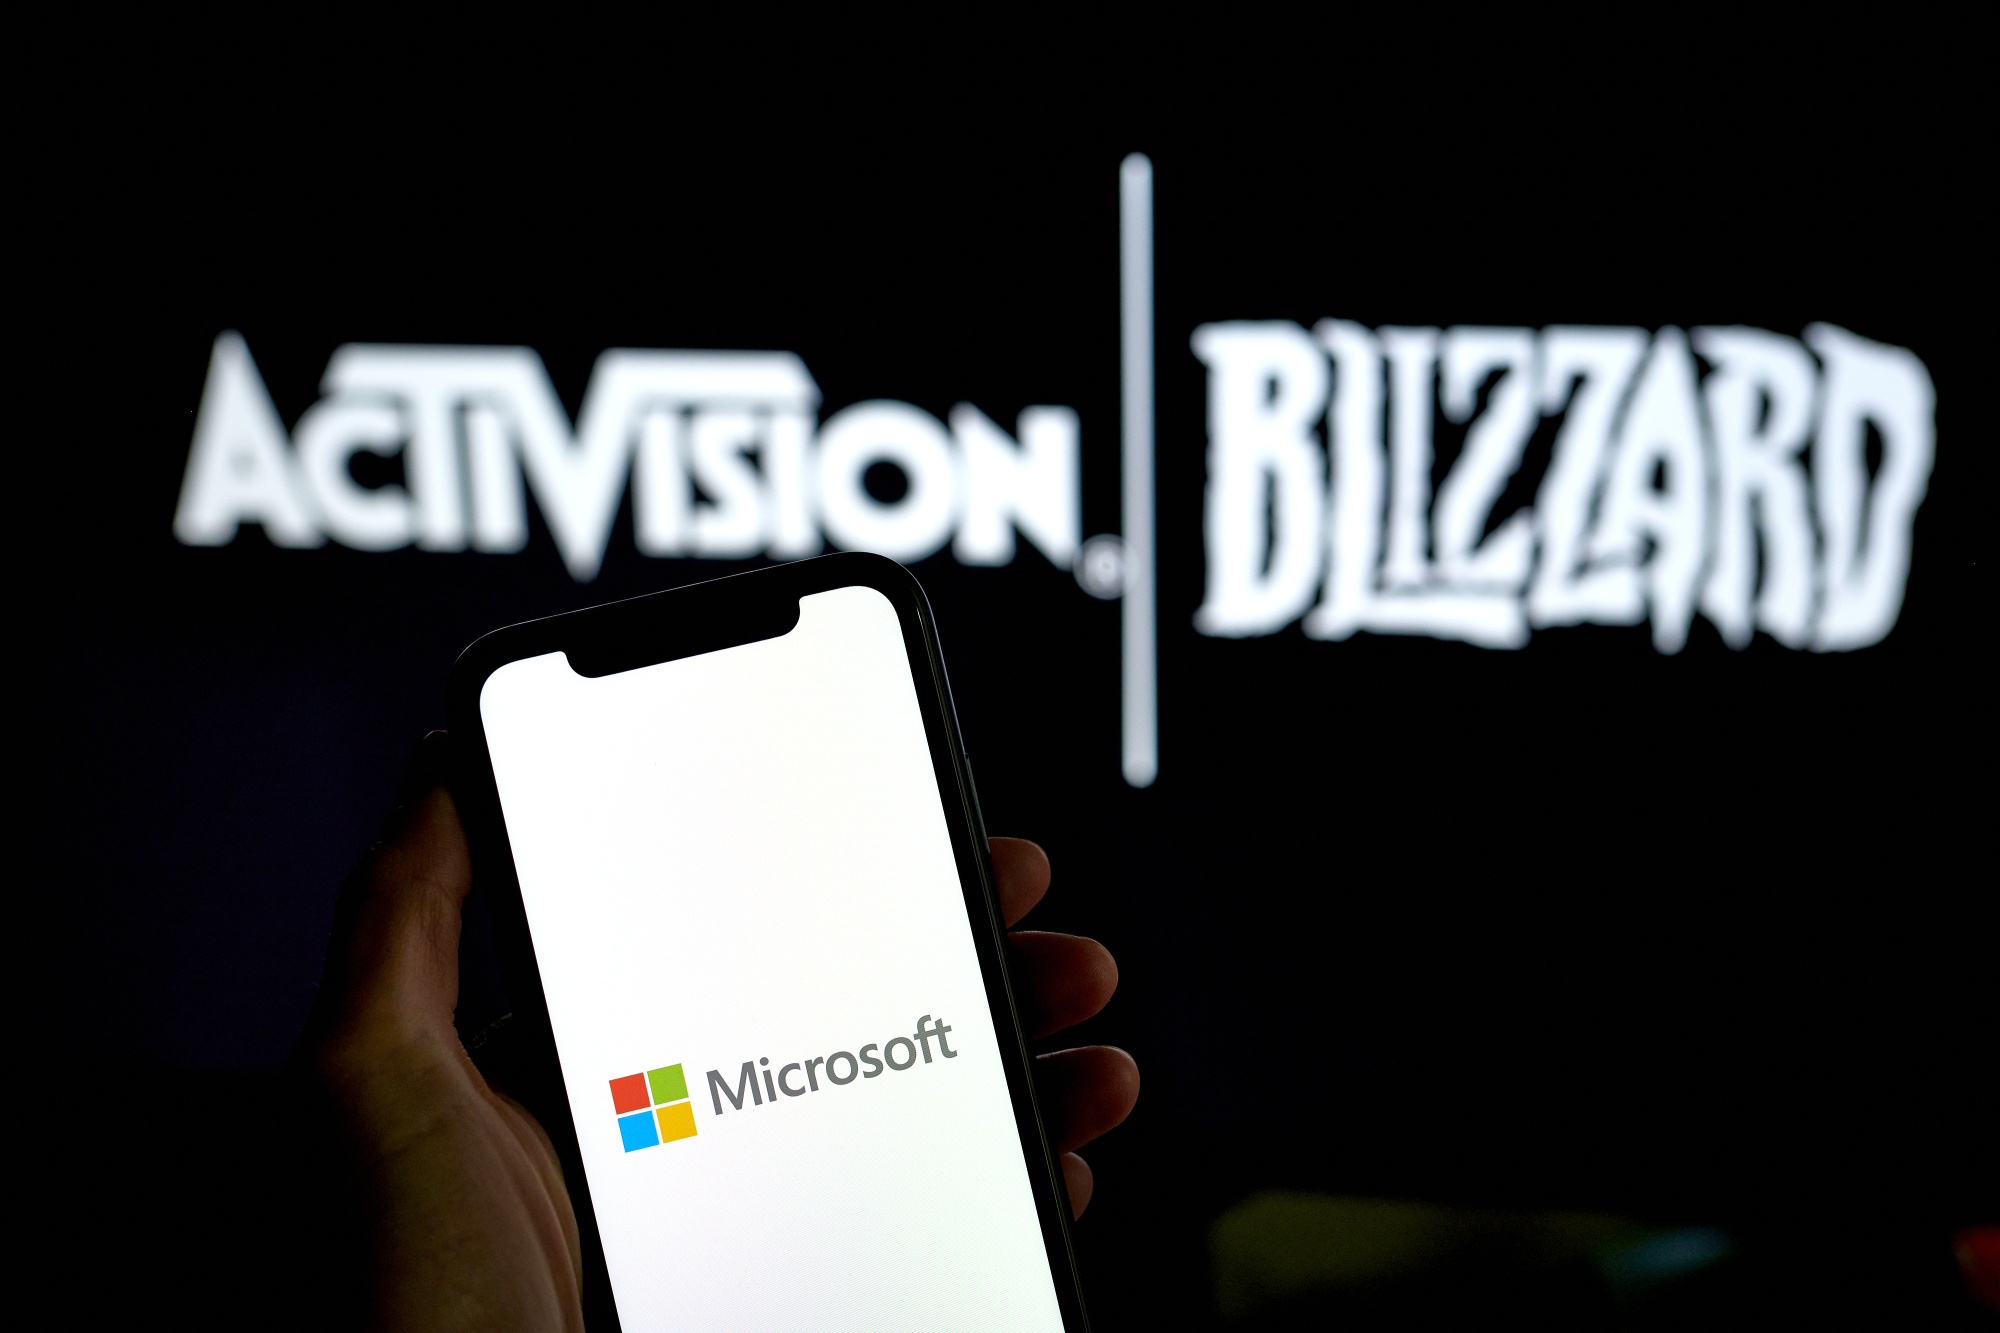 CMA Says Discussion With Microsoft About Activision Blizzard